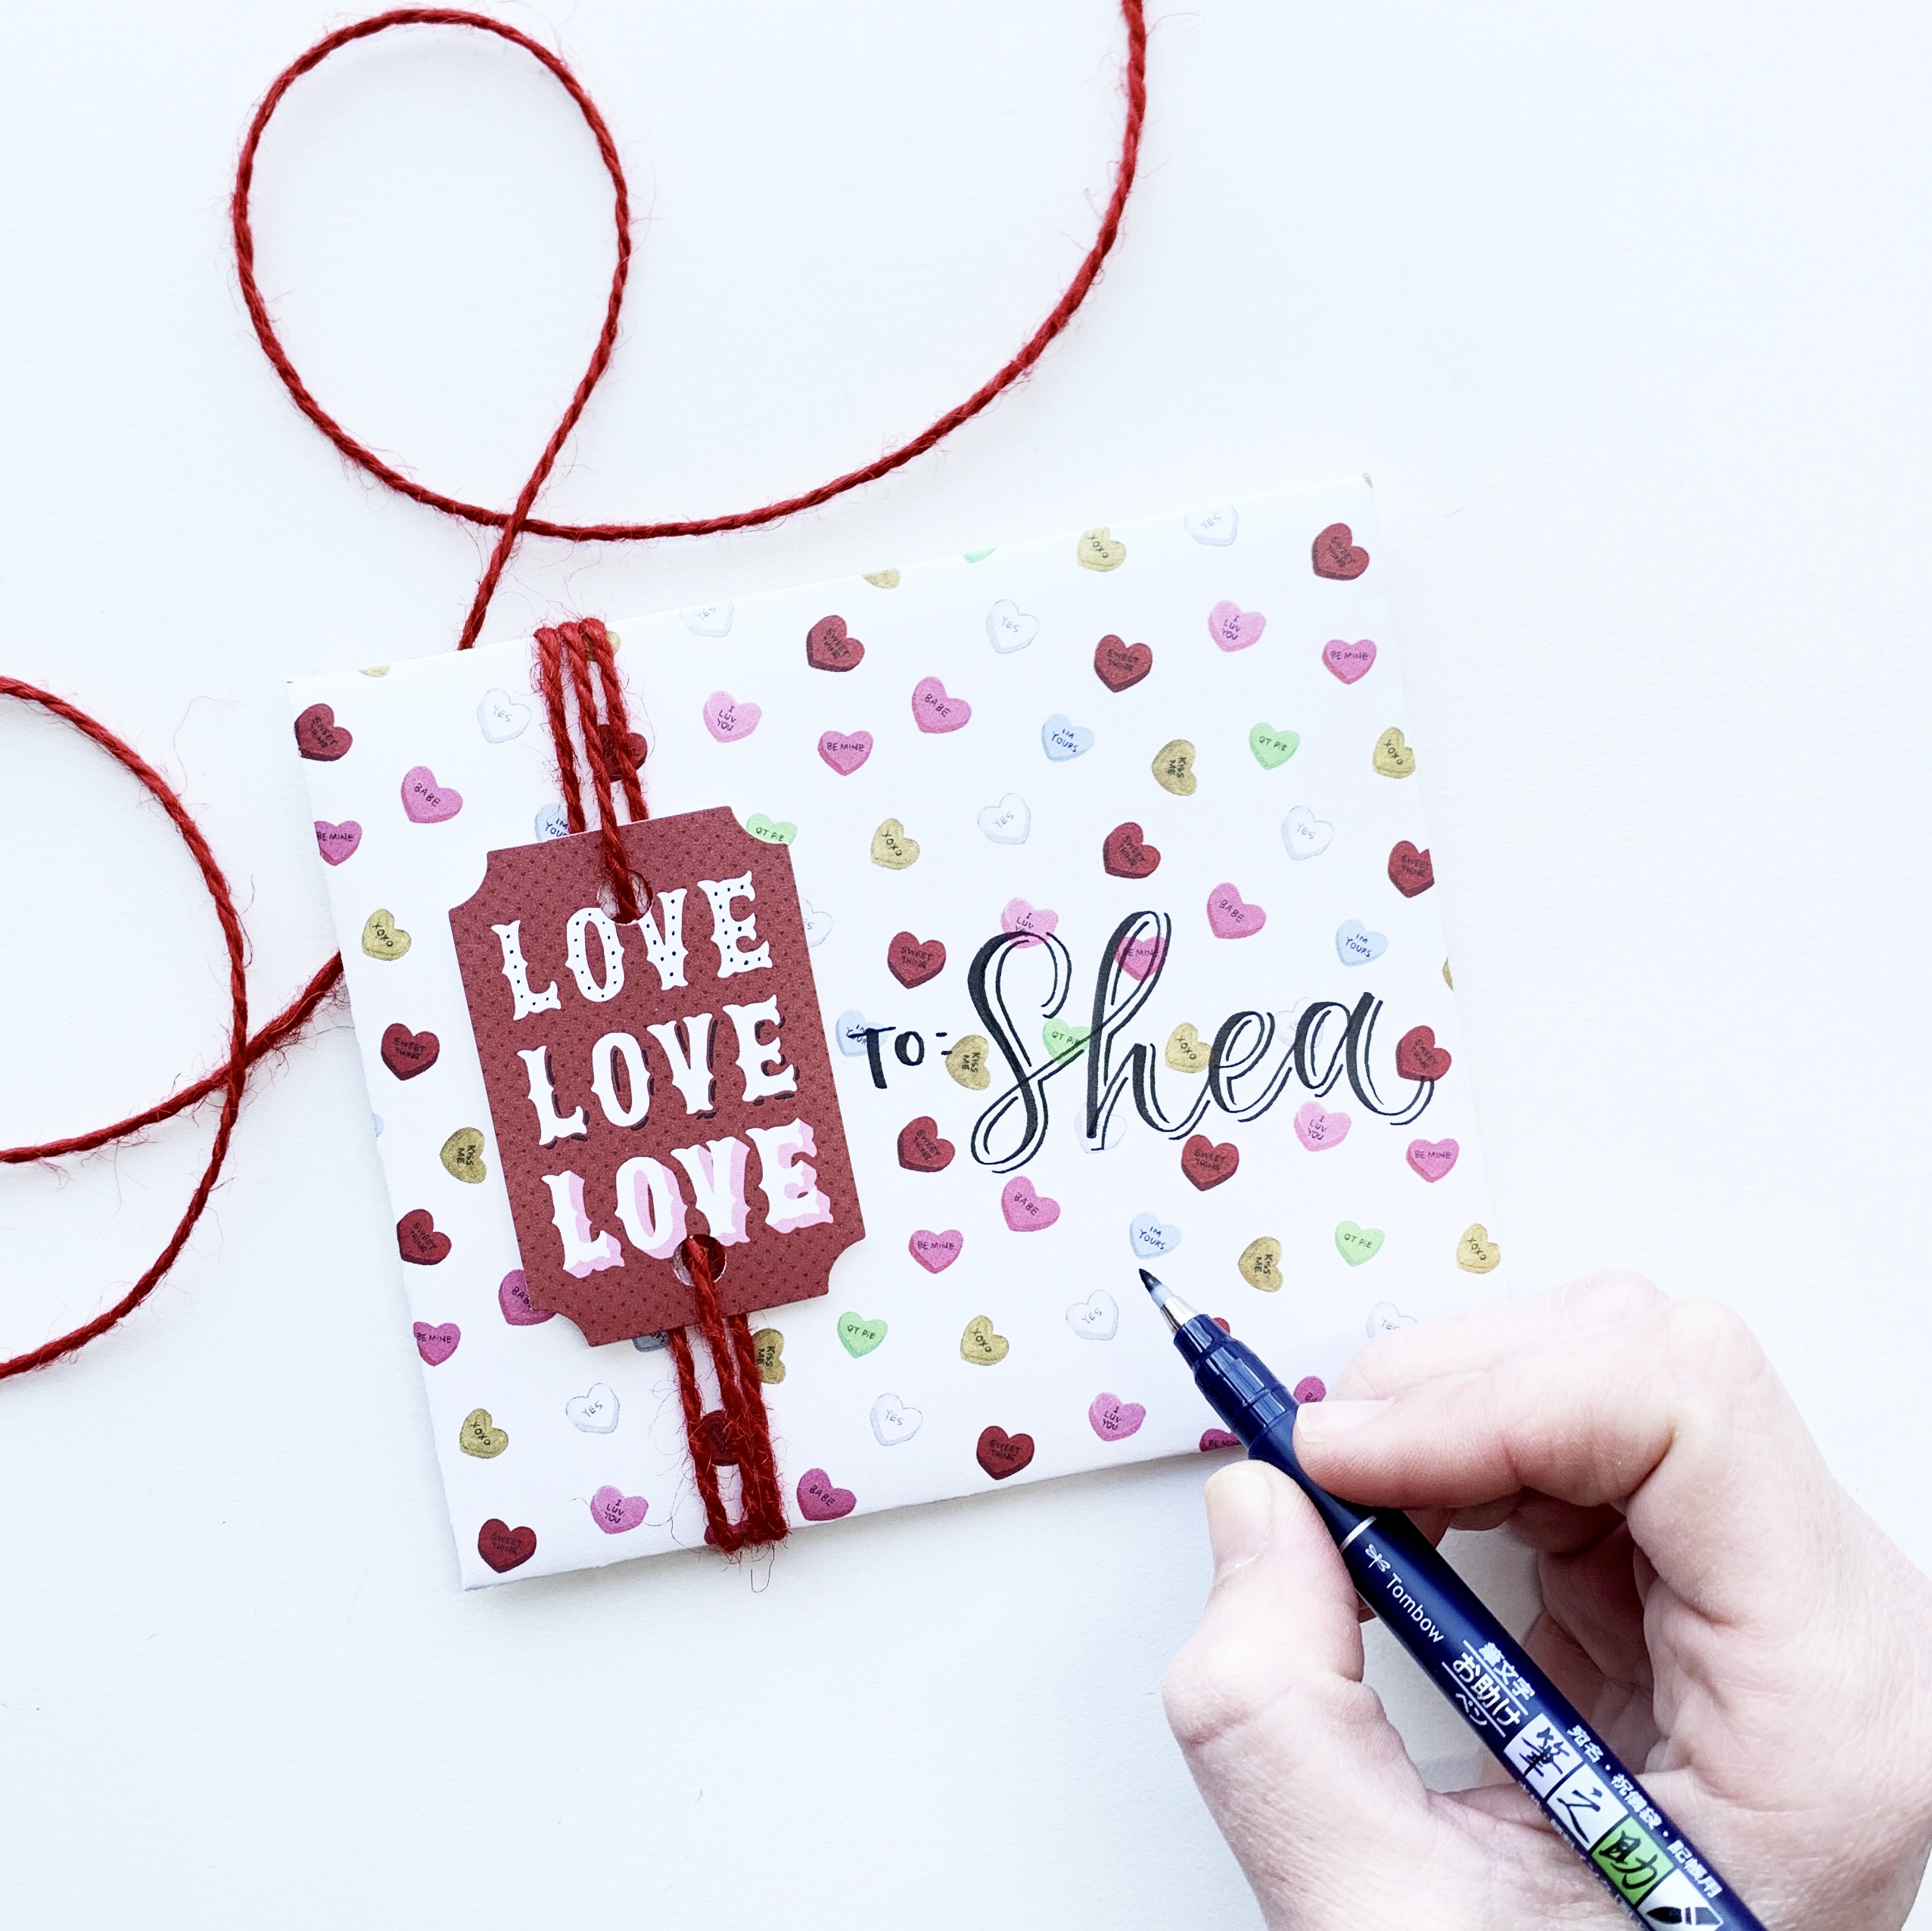 Learn how to create a super easy envelope with Adrienne from @studio80design!